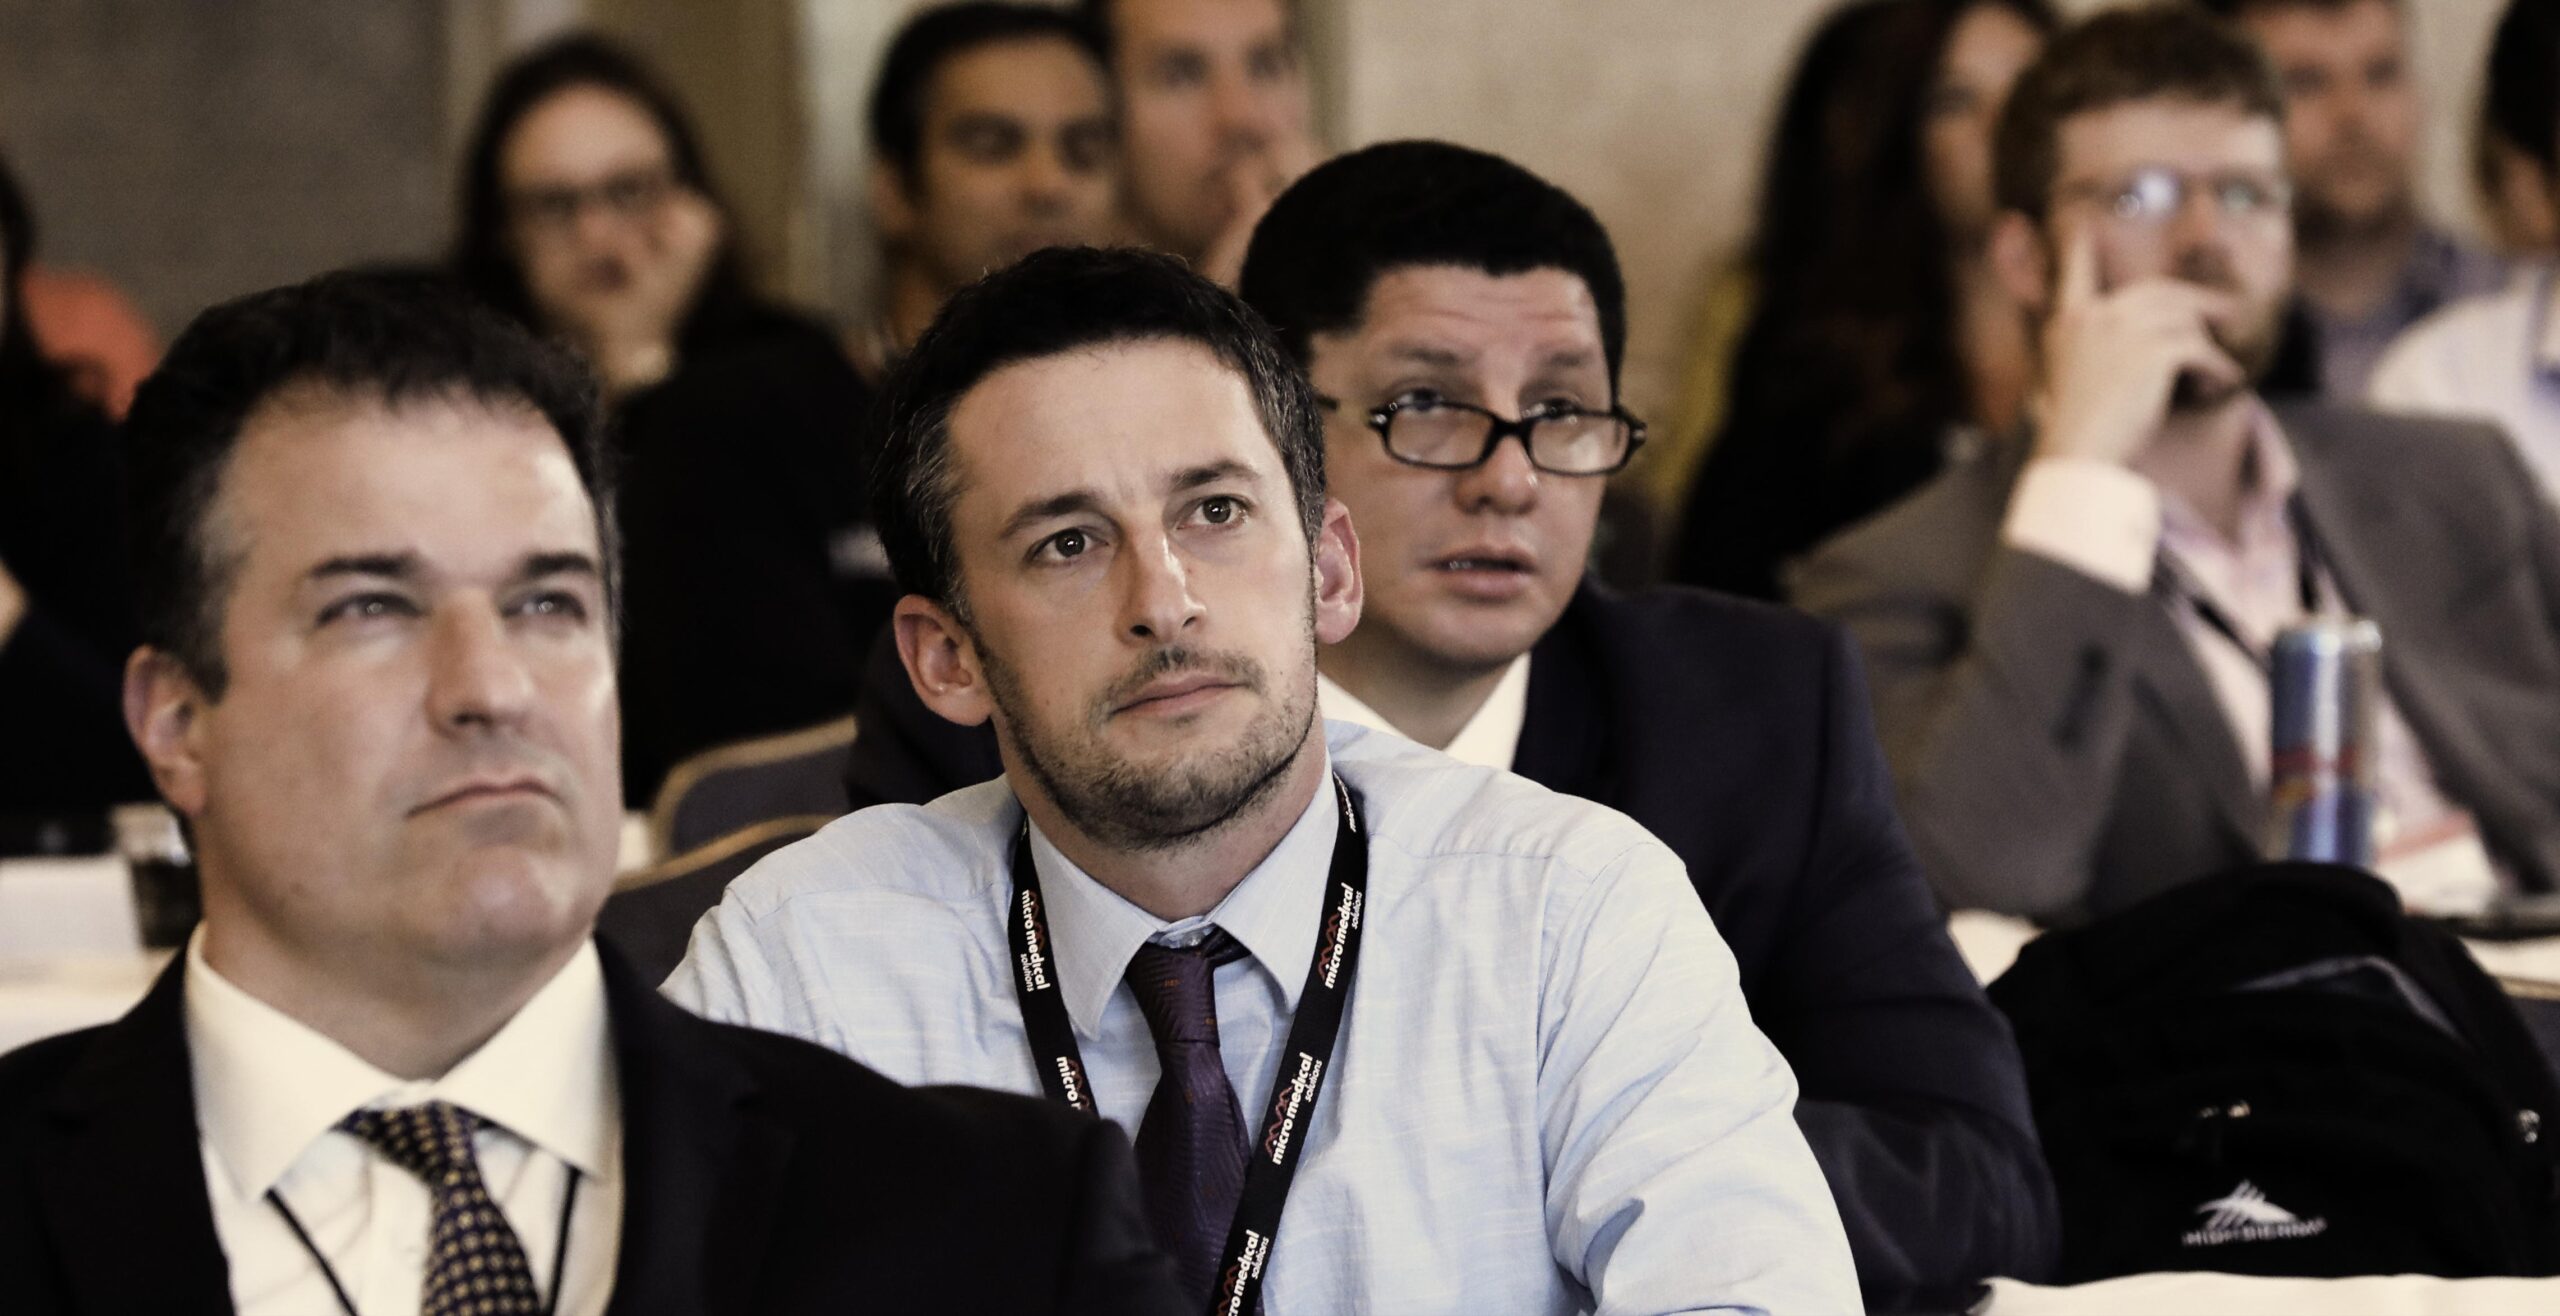 Covention Photography of males looking intently at the speaker during a conference.